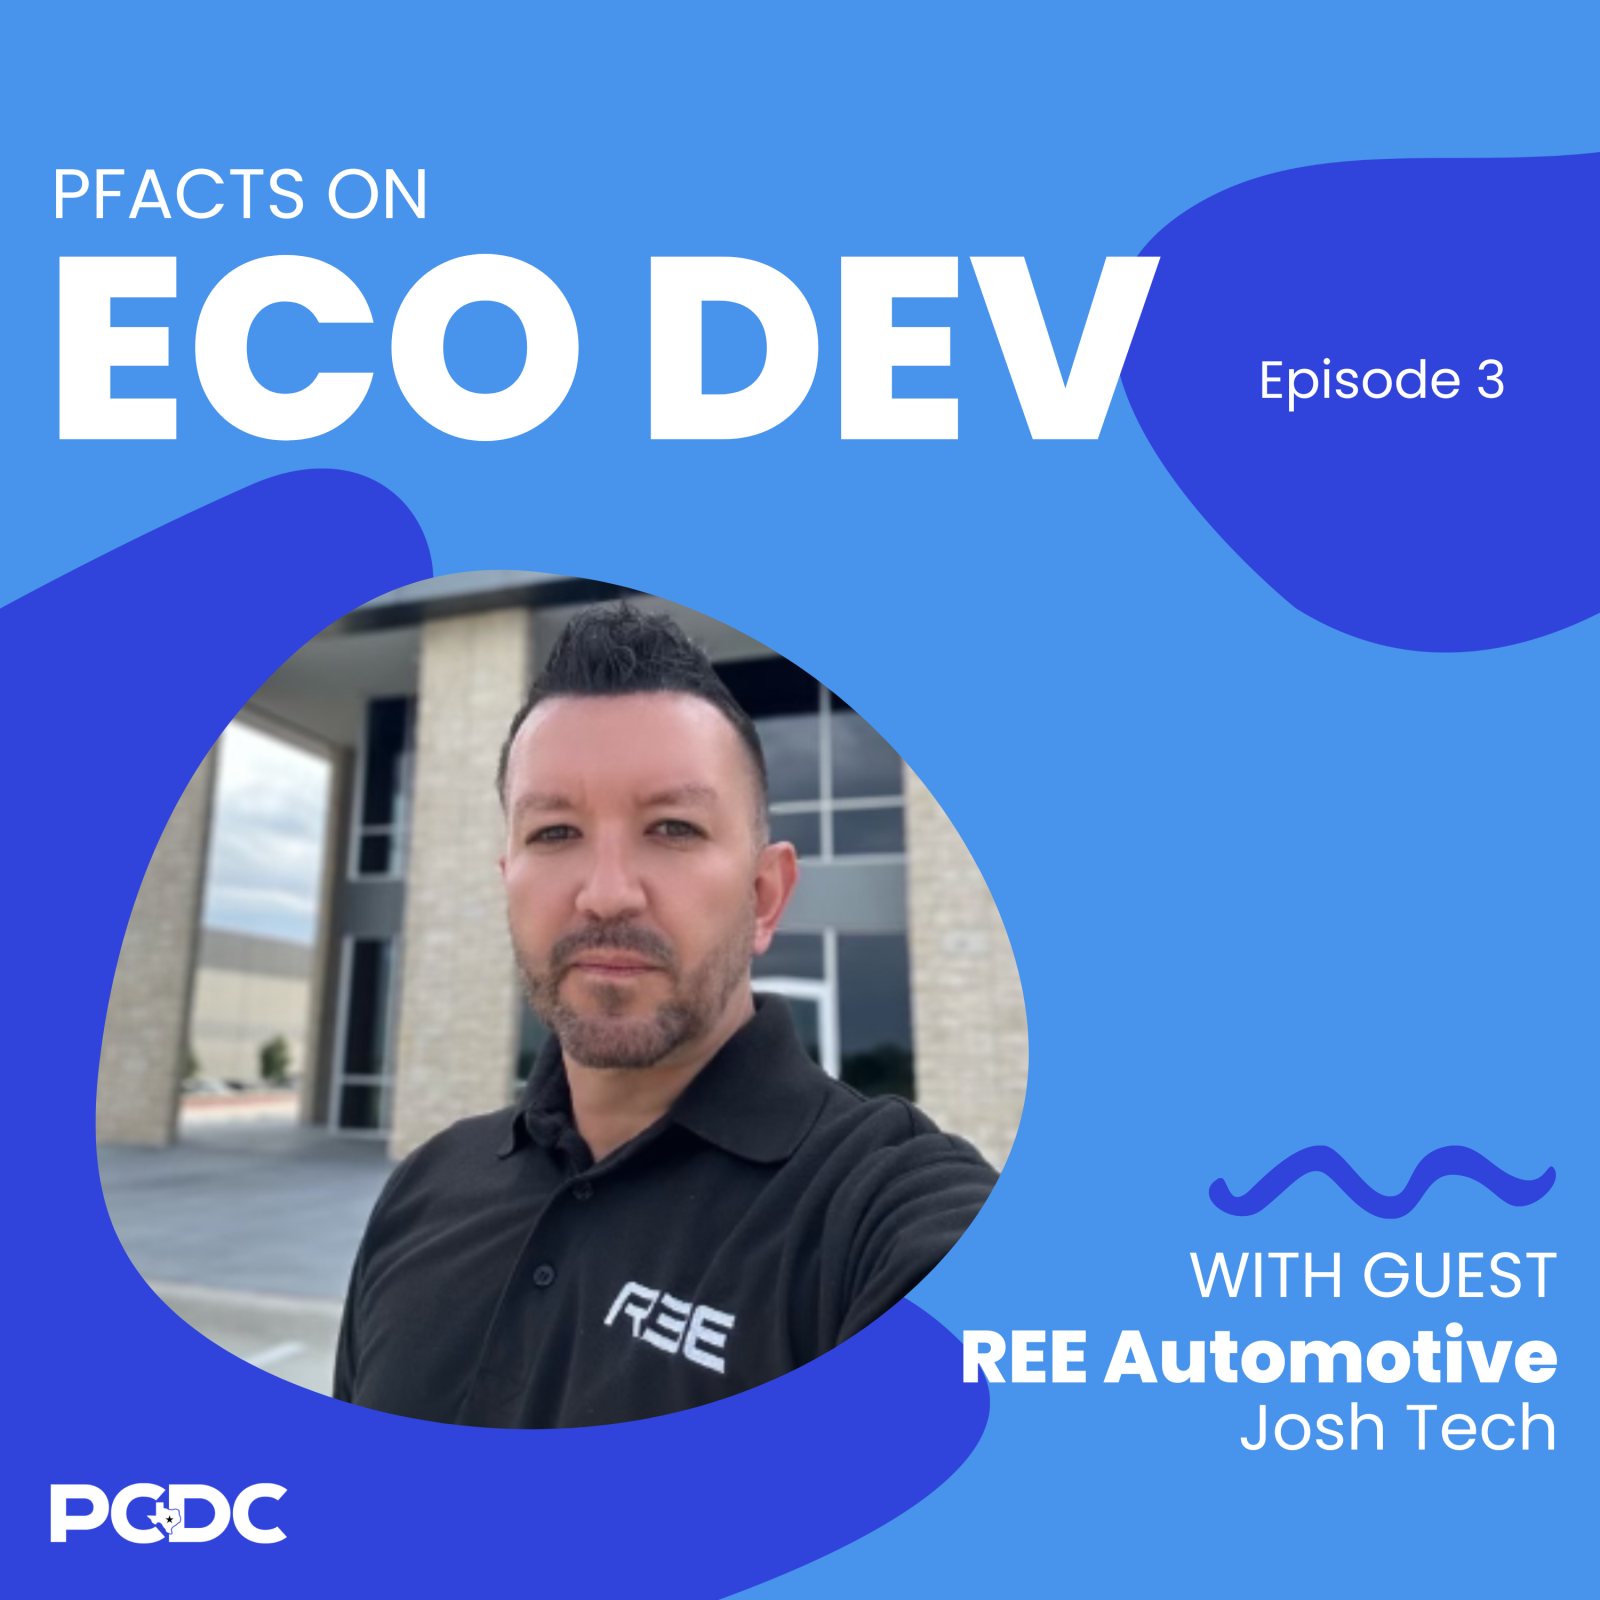 PFACTS ON ECO DEV PODCAST EPISODE 3 Photo